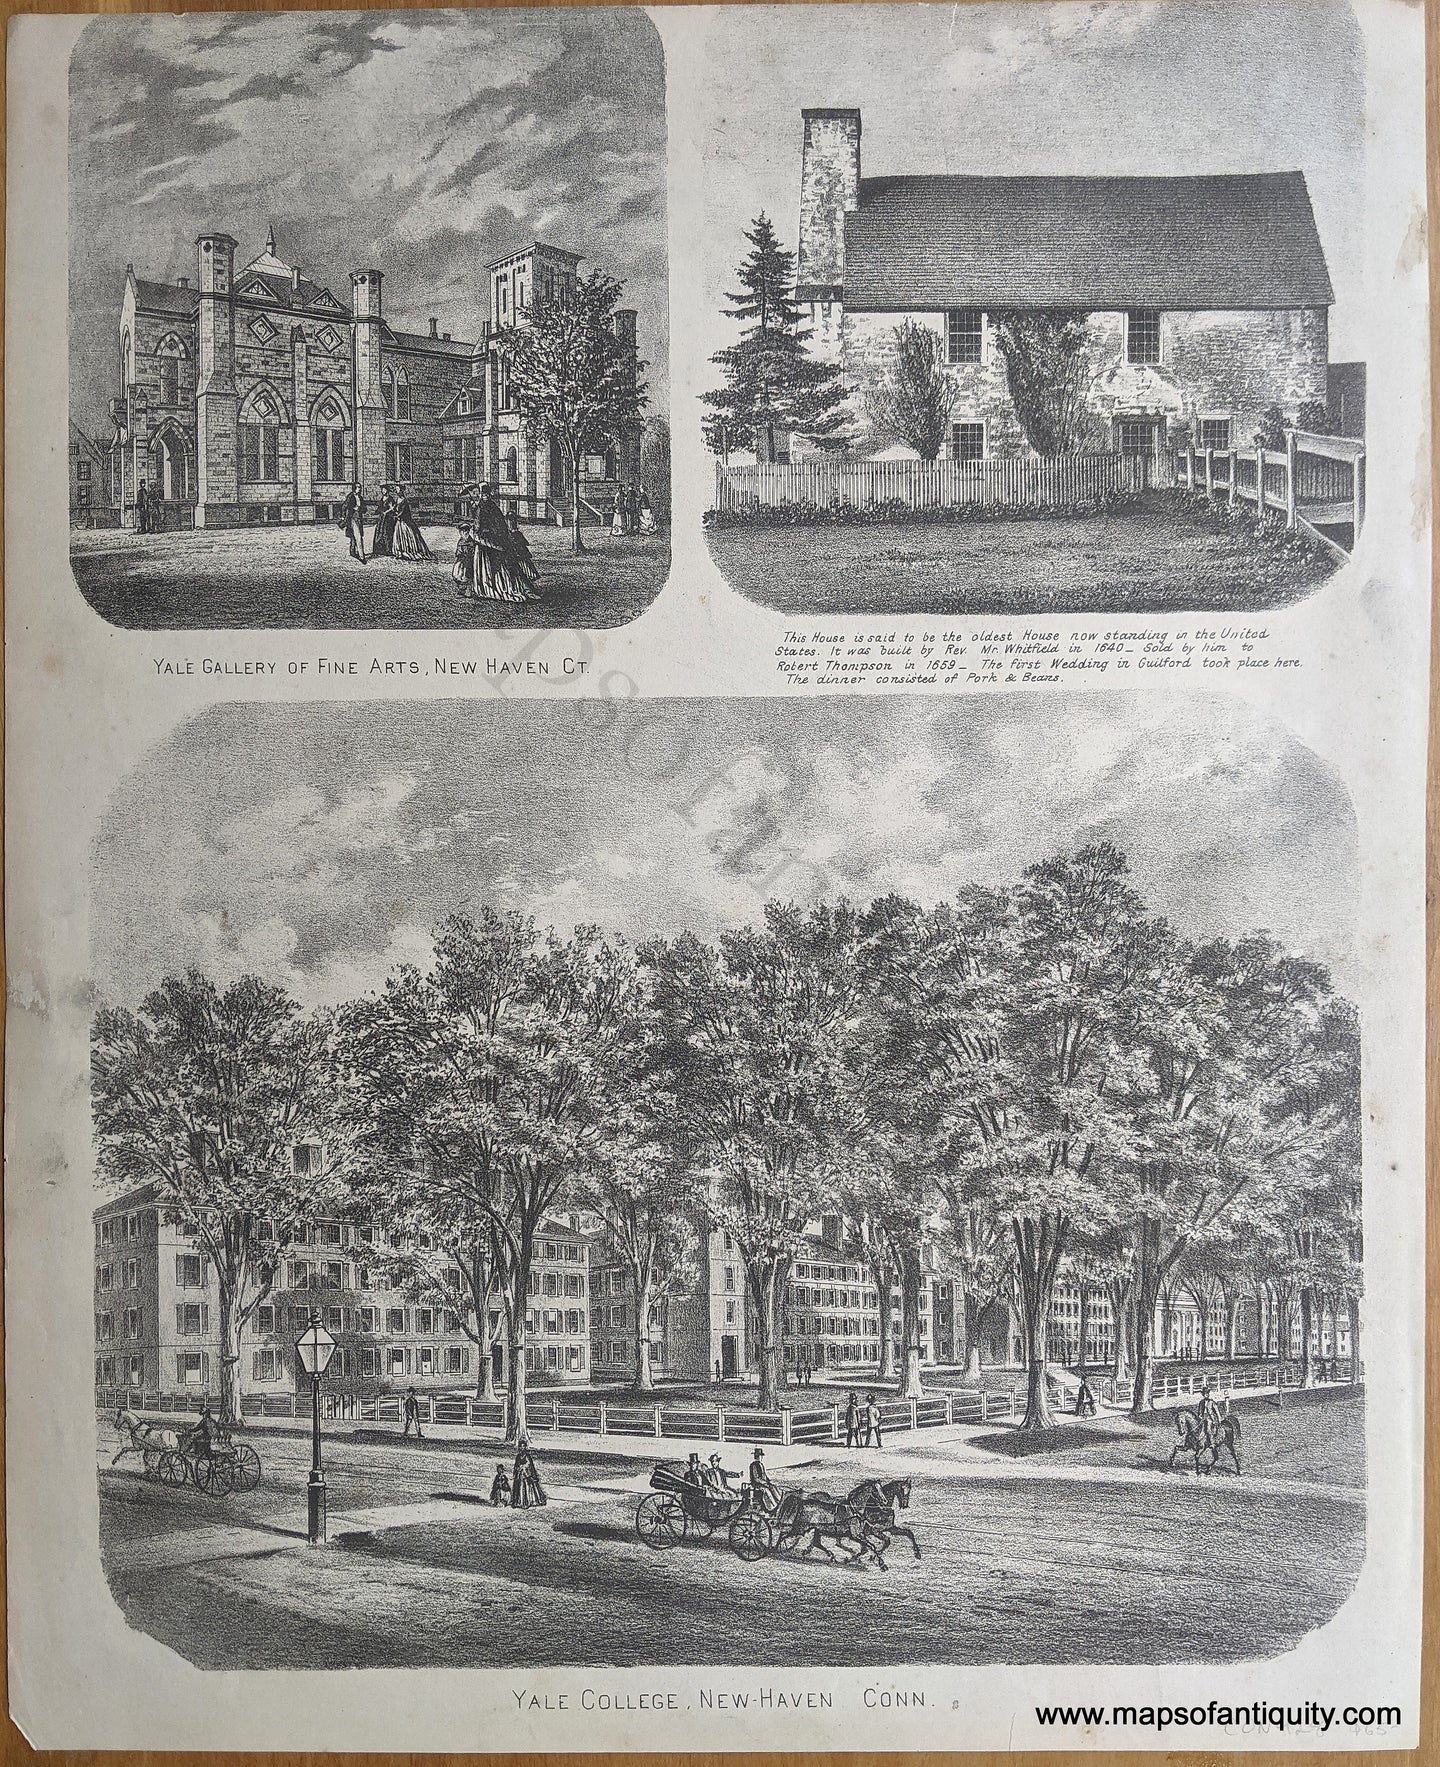 1868 - Yale College, New-Haven Conn., Yale Gallery of Fine Arts, New Haven CT - Antique Print